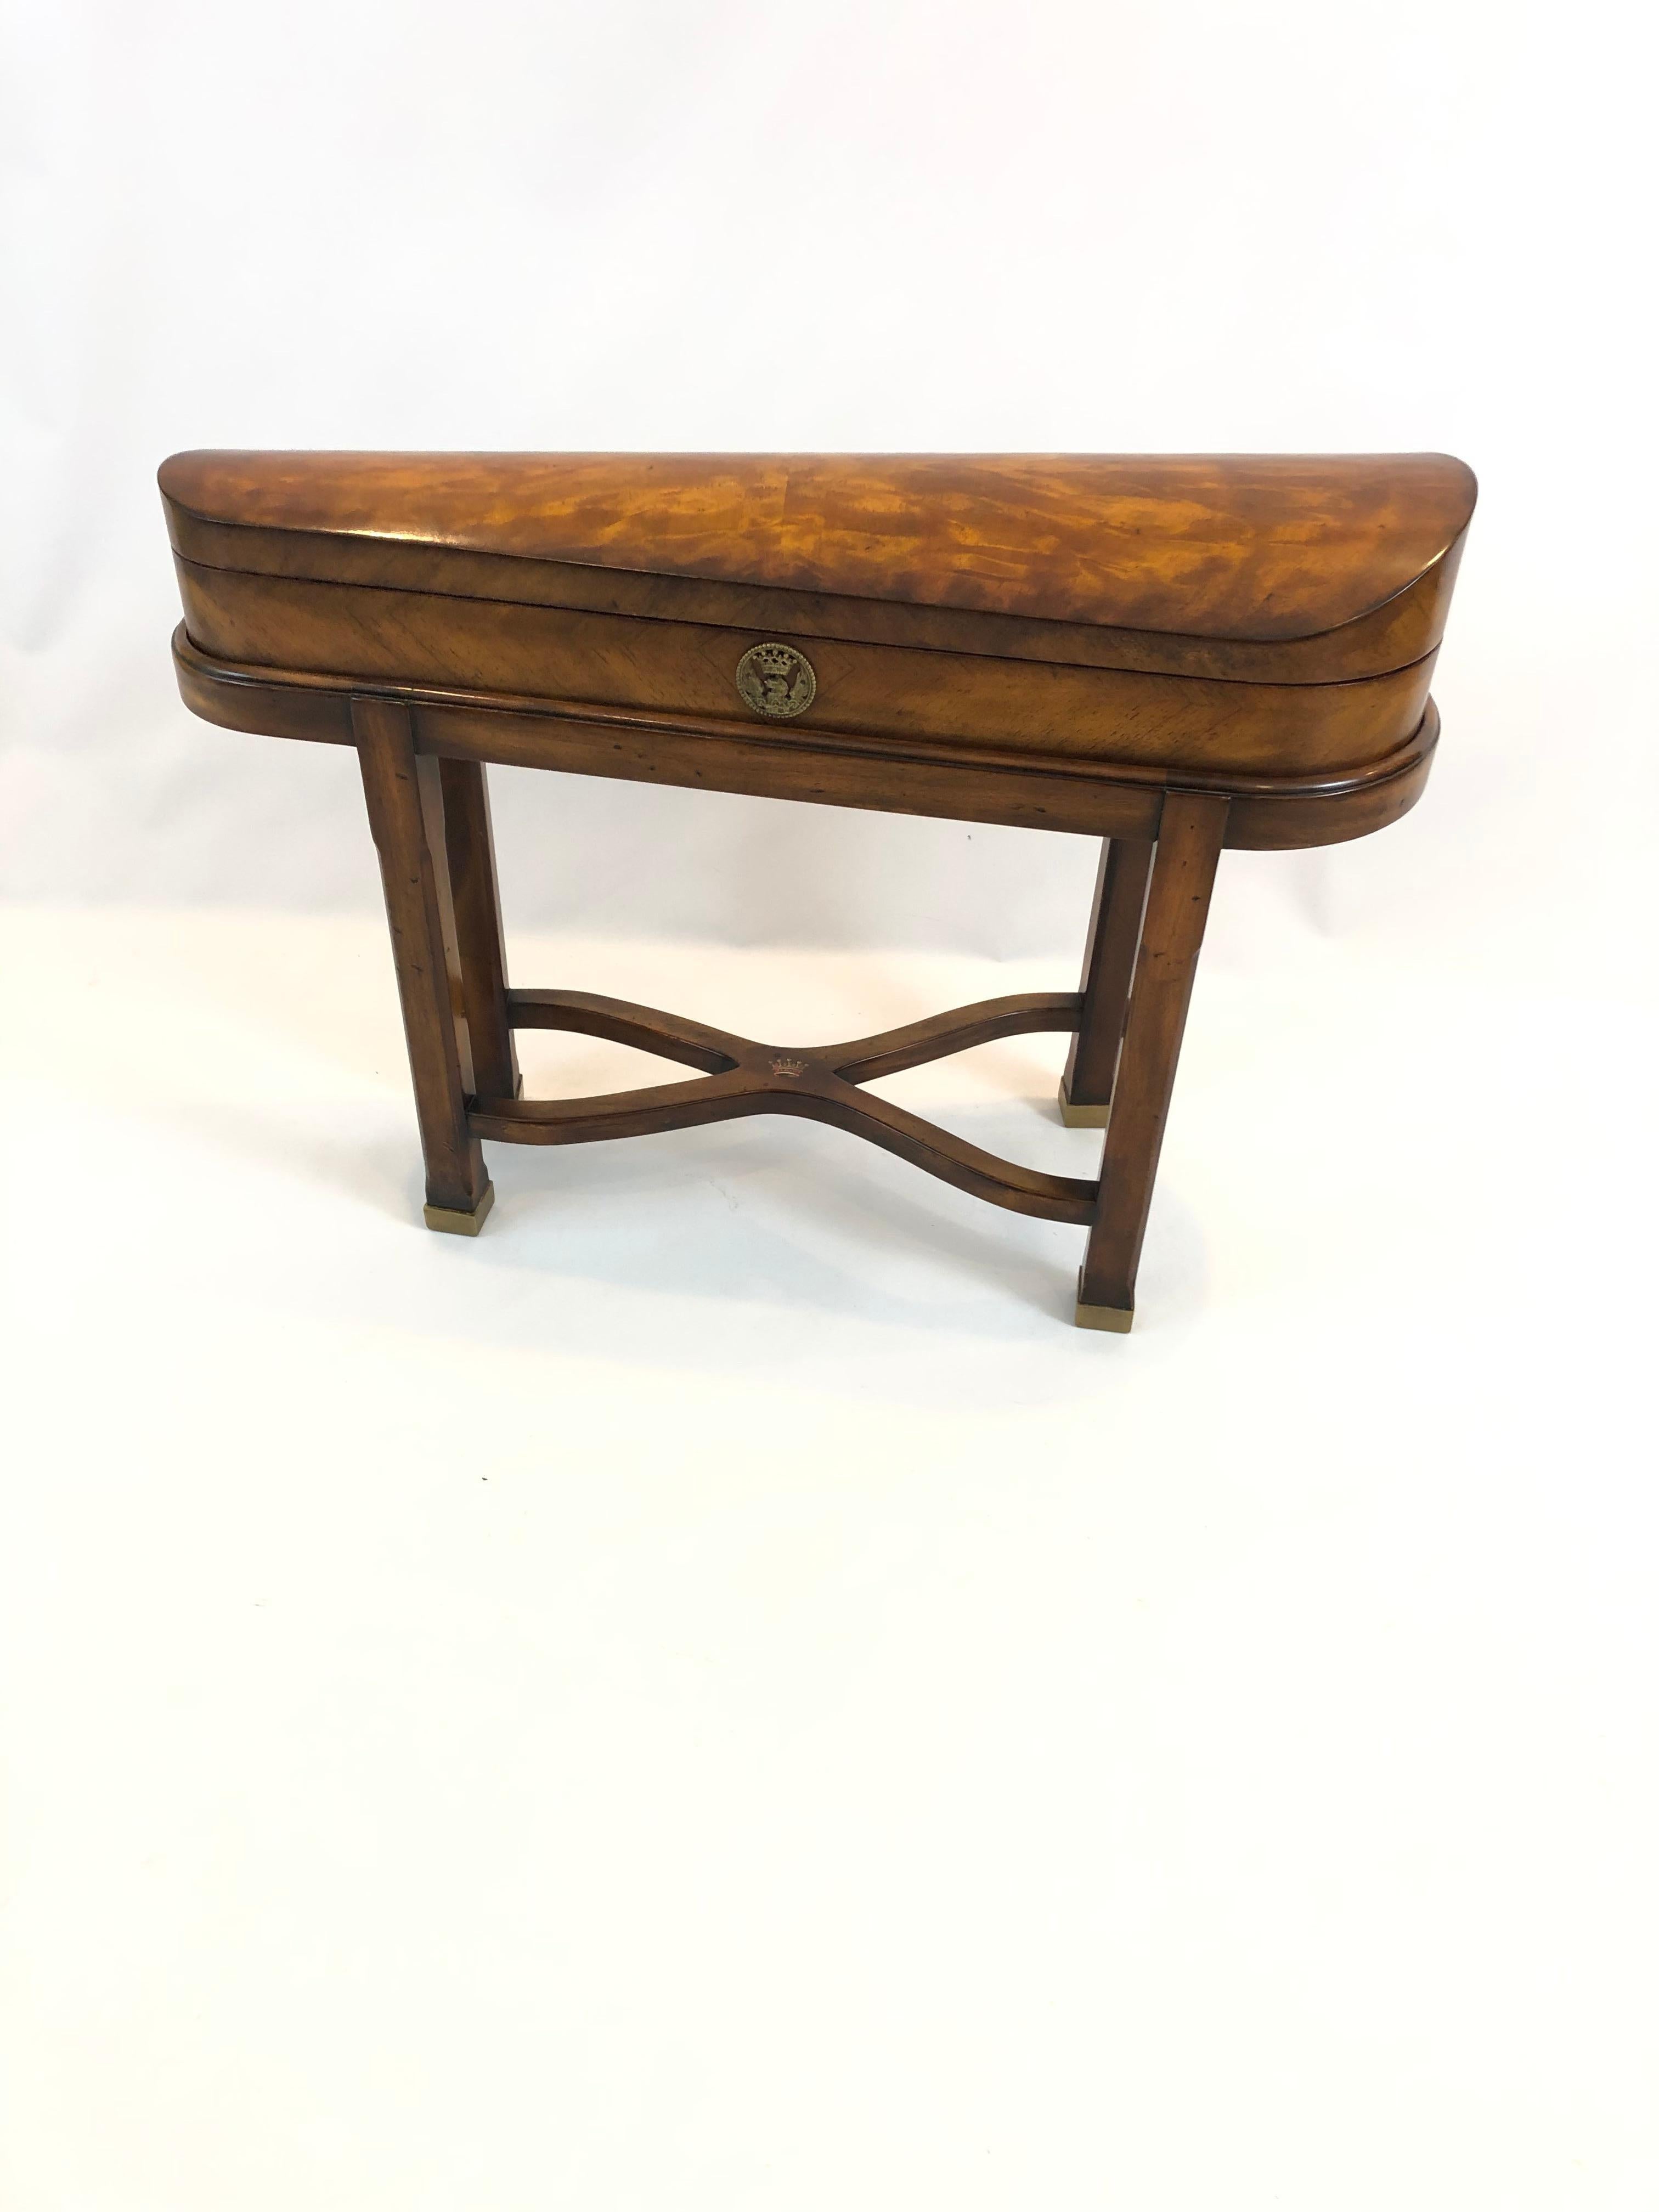 A magical conversation piece of an end table from the Althorp Edition of Theodore Alexander, having gorgeous grained burl violin case shaped form. The table top opens to reveal a hollowed out violin shape and 3 little drawers with brass violin